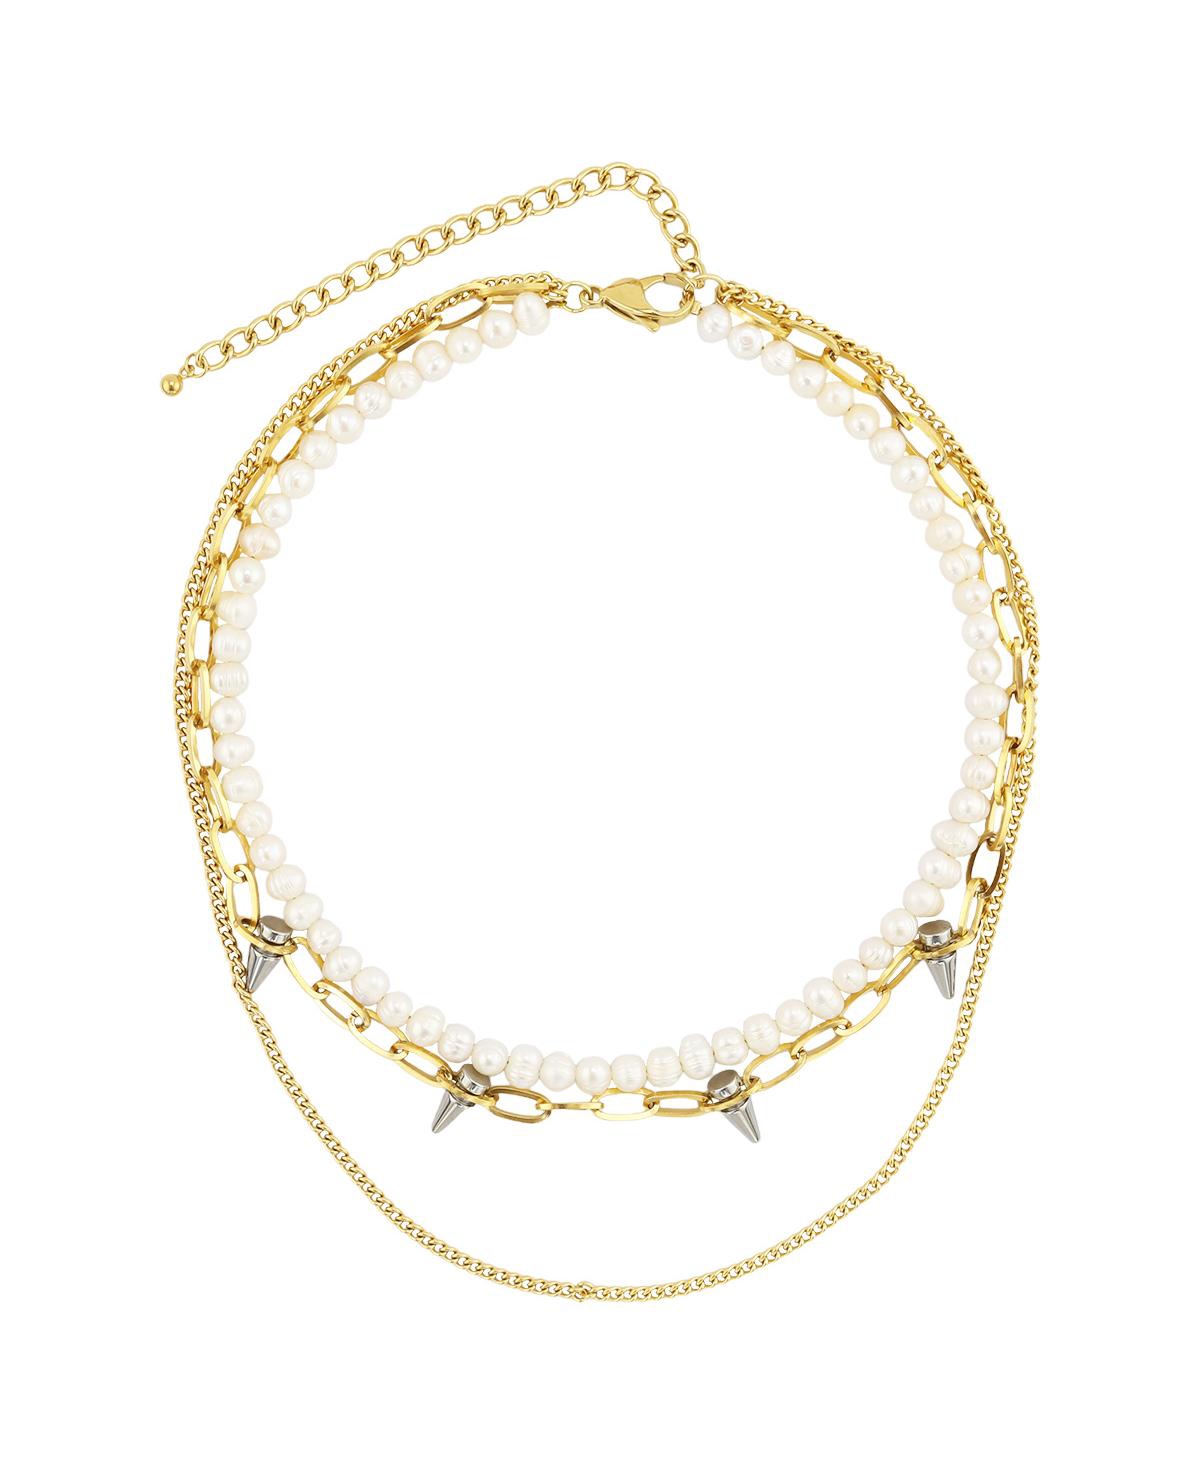 Ash Pearl and Spike Layered Necklace - Two tone